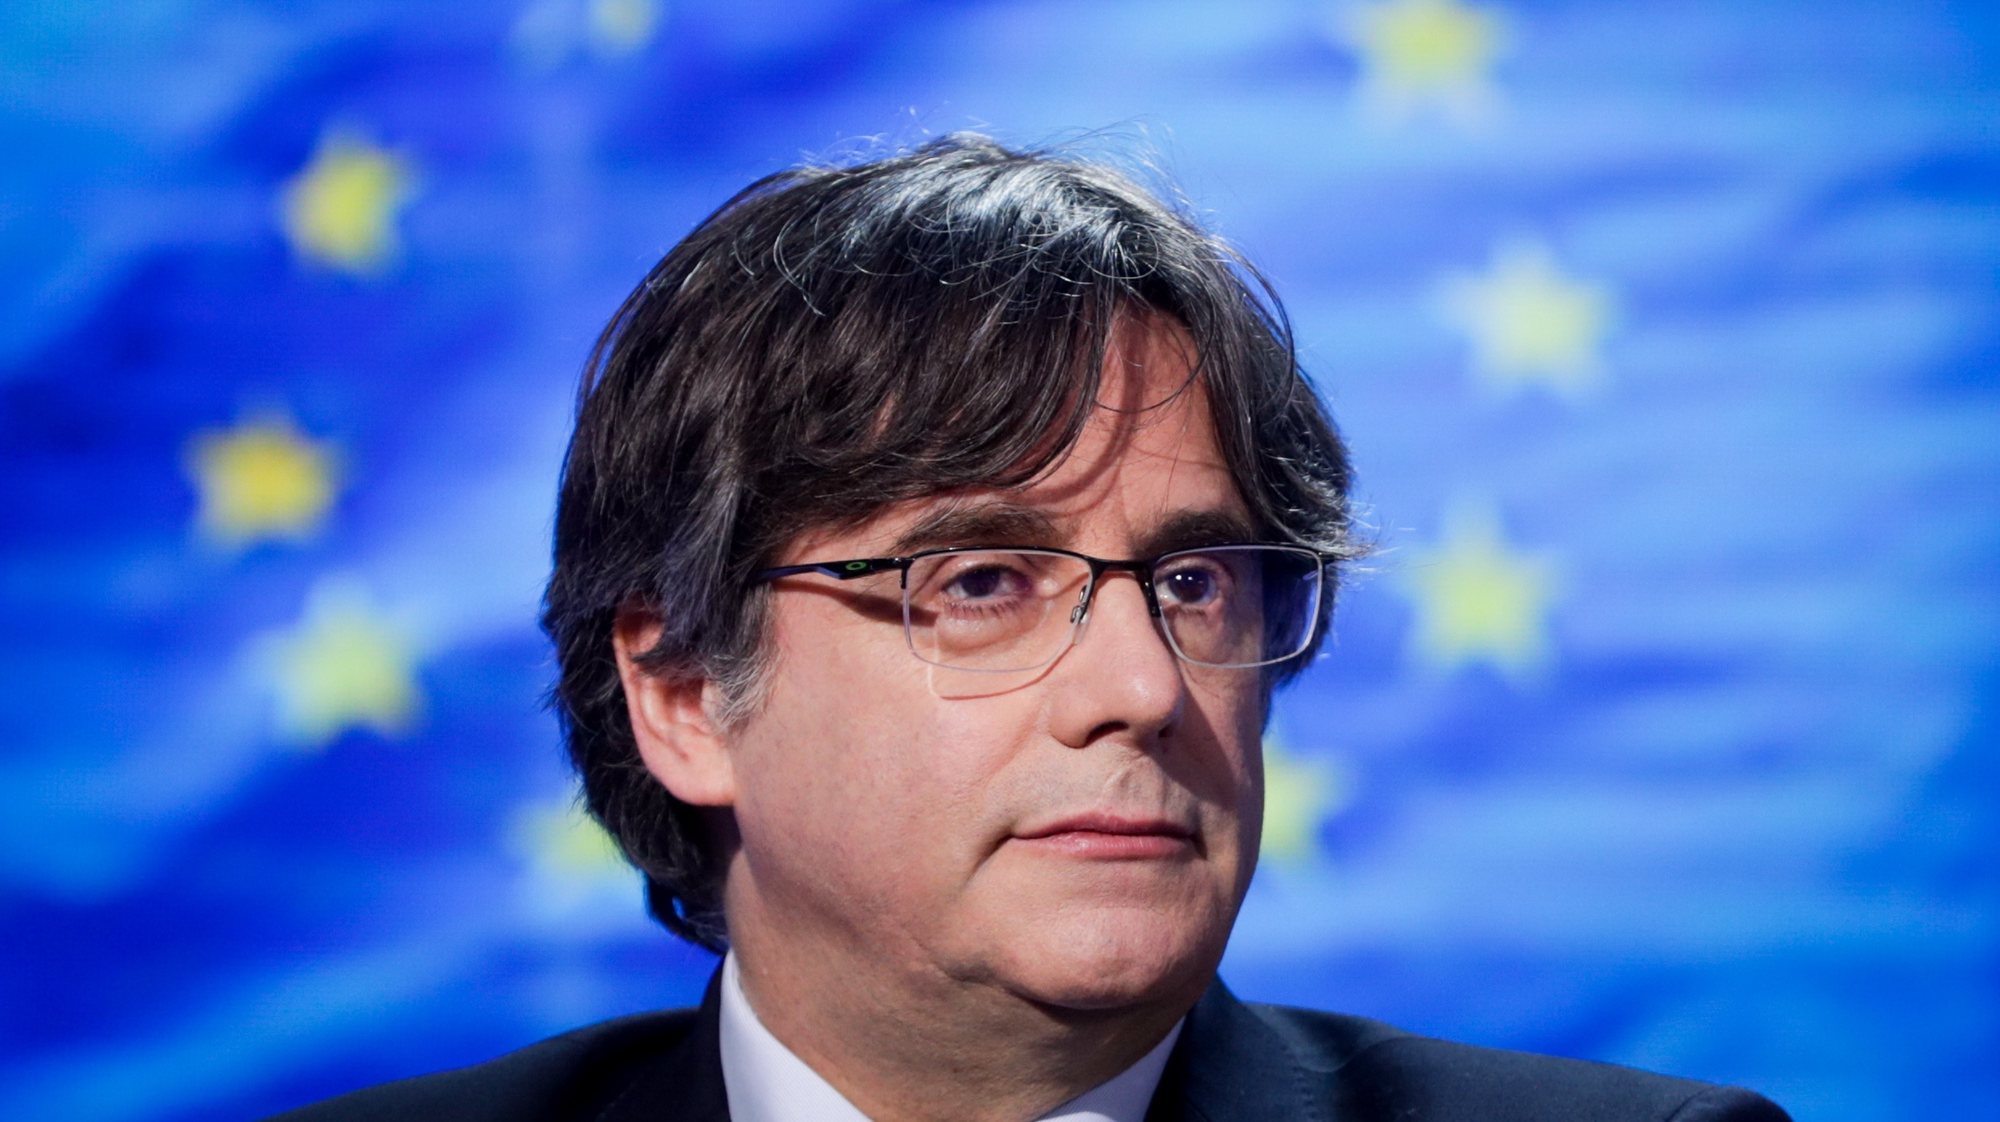 epaselect epa09063279 Member of European Parliament Catalonia&#039;s former regional president Carles Puigdemont is interviewed by TV show &#039;La Faute a l&#039;Europe?&#039; at the European Parliament in Brussels, Belgium, 09 March 2021. The European Parliament on 09 March voted in favor of stripping Puigdemont and two of his associates of immunity. Spain had requested the extradition of Puigdemont, who fled to Belgium in October 2017 after a referendum on the independent of Catalonia.  EPA/STEPHANIE LECOCQ